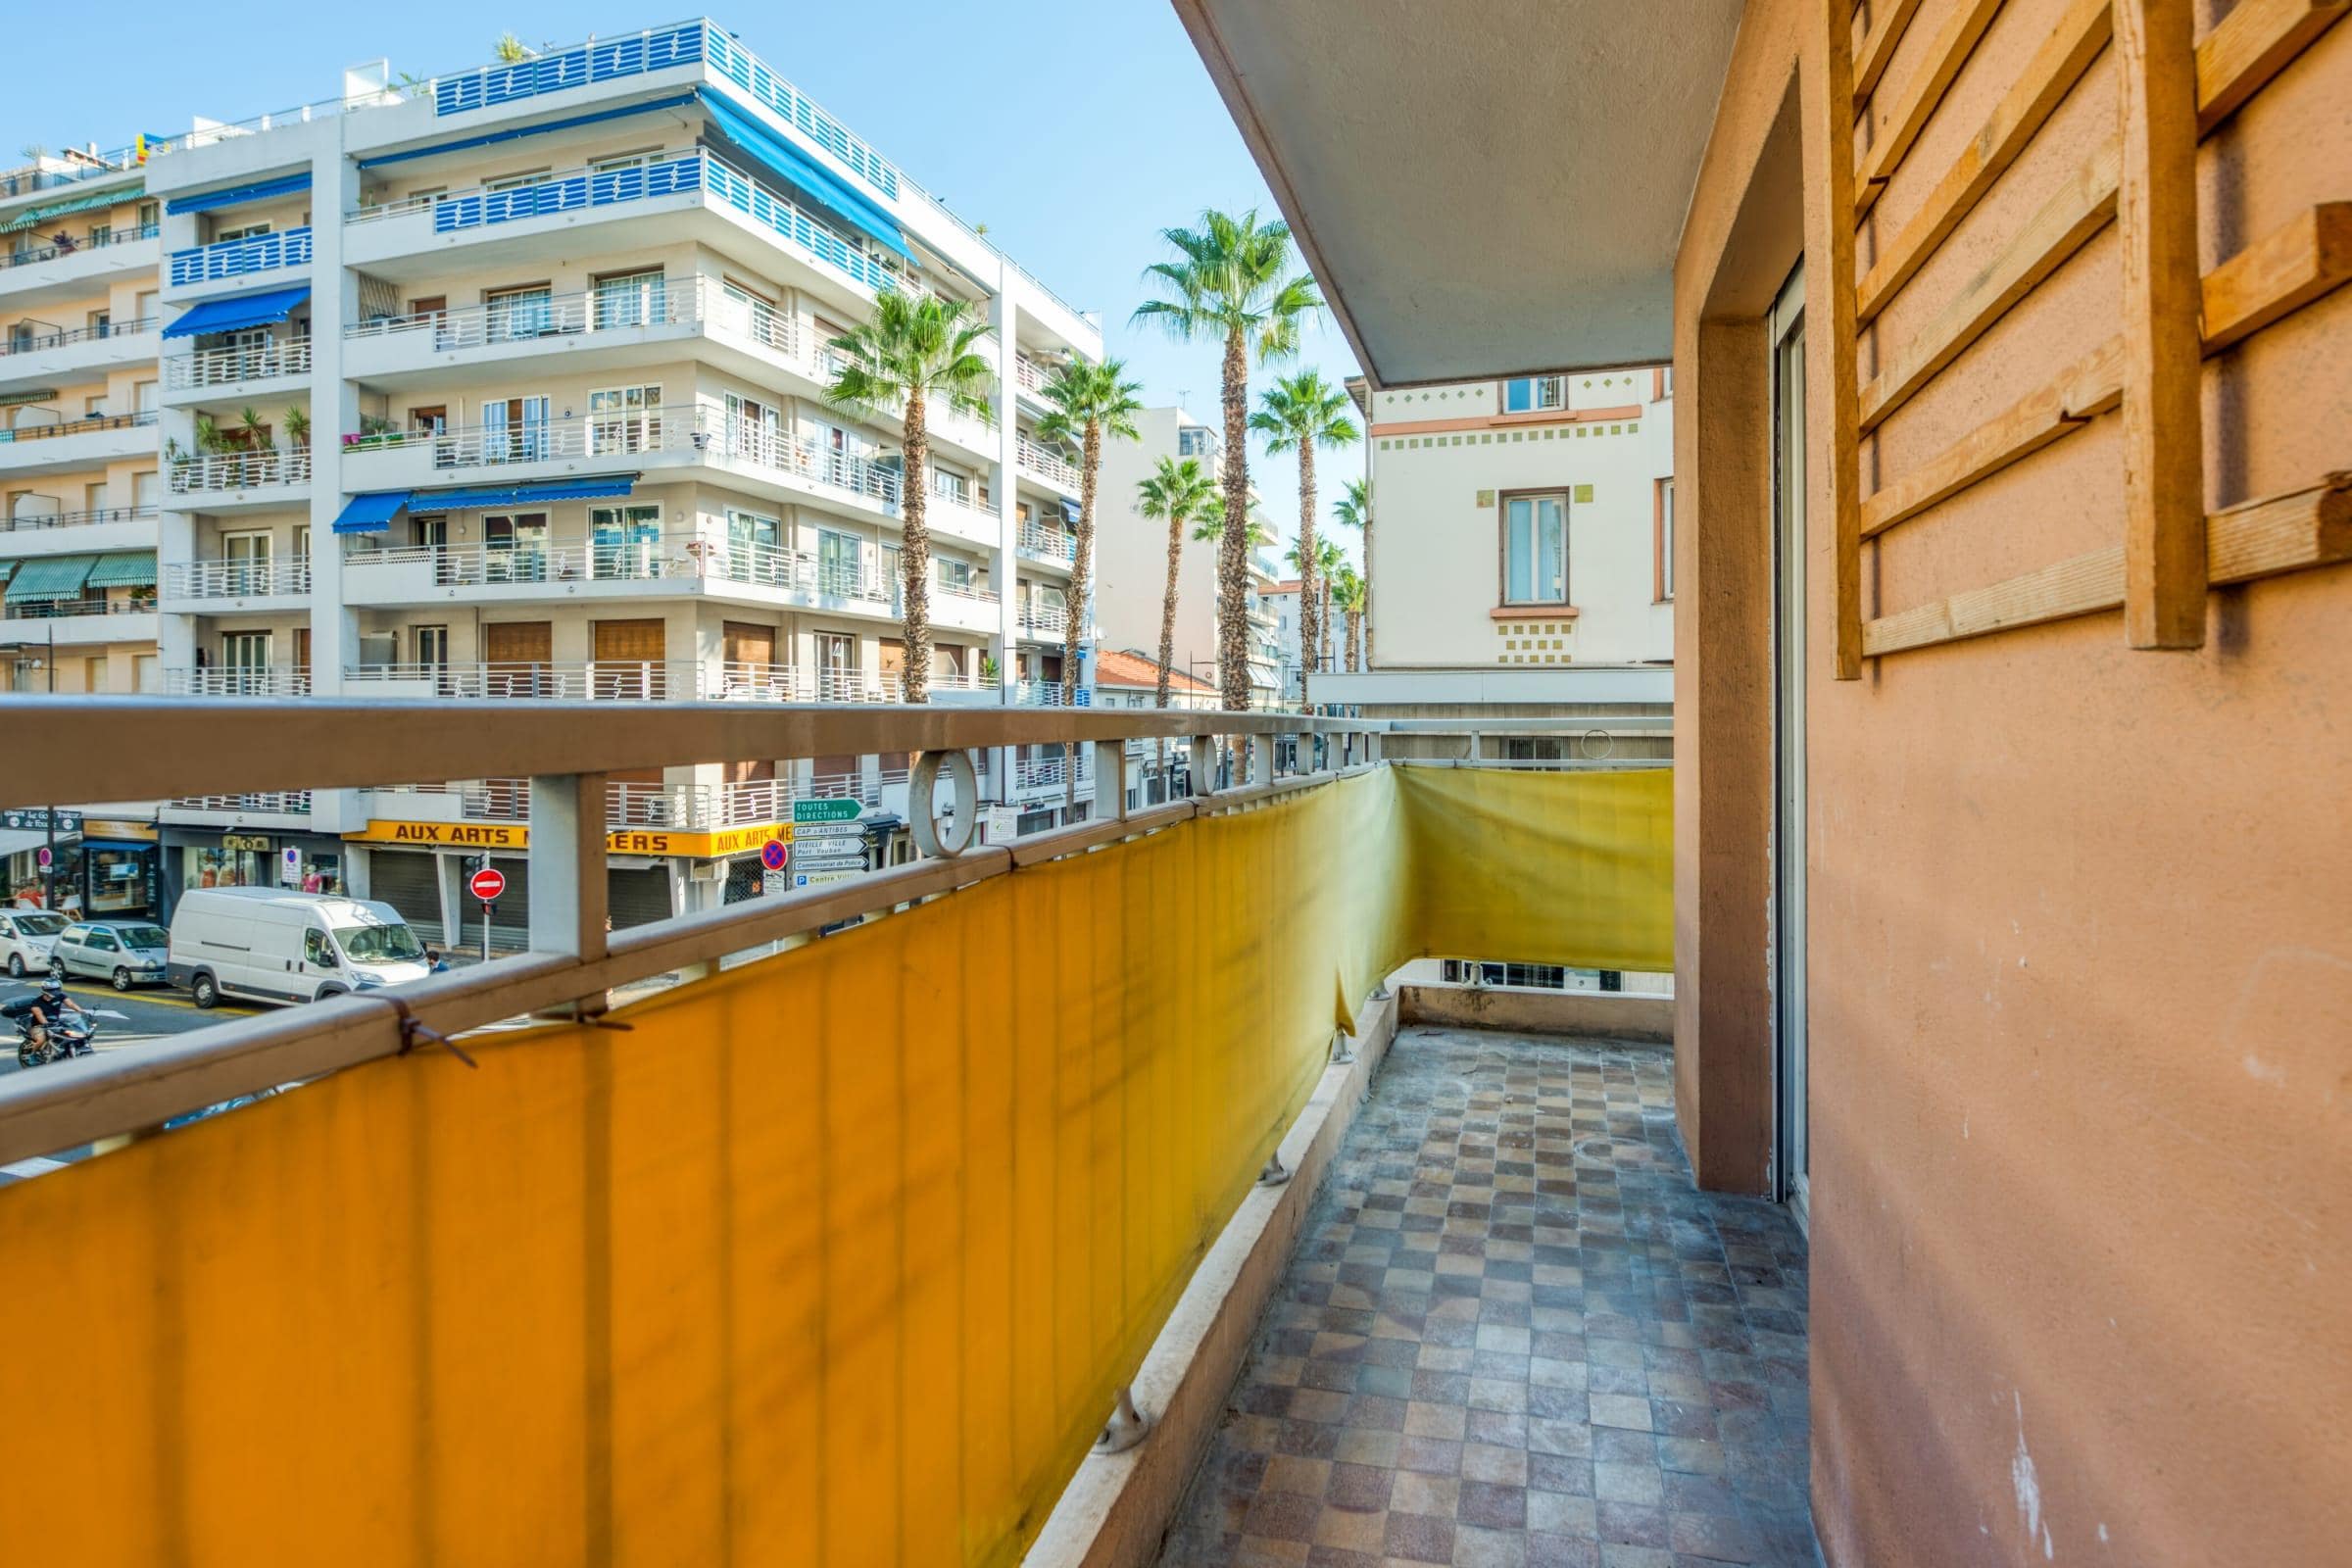 Property Image 2 - Superb air conditioned apartment with balcony - Antibes